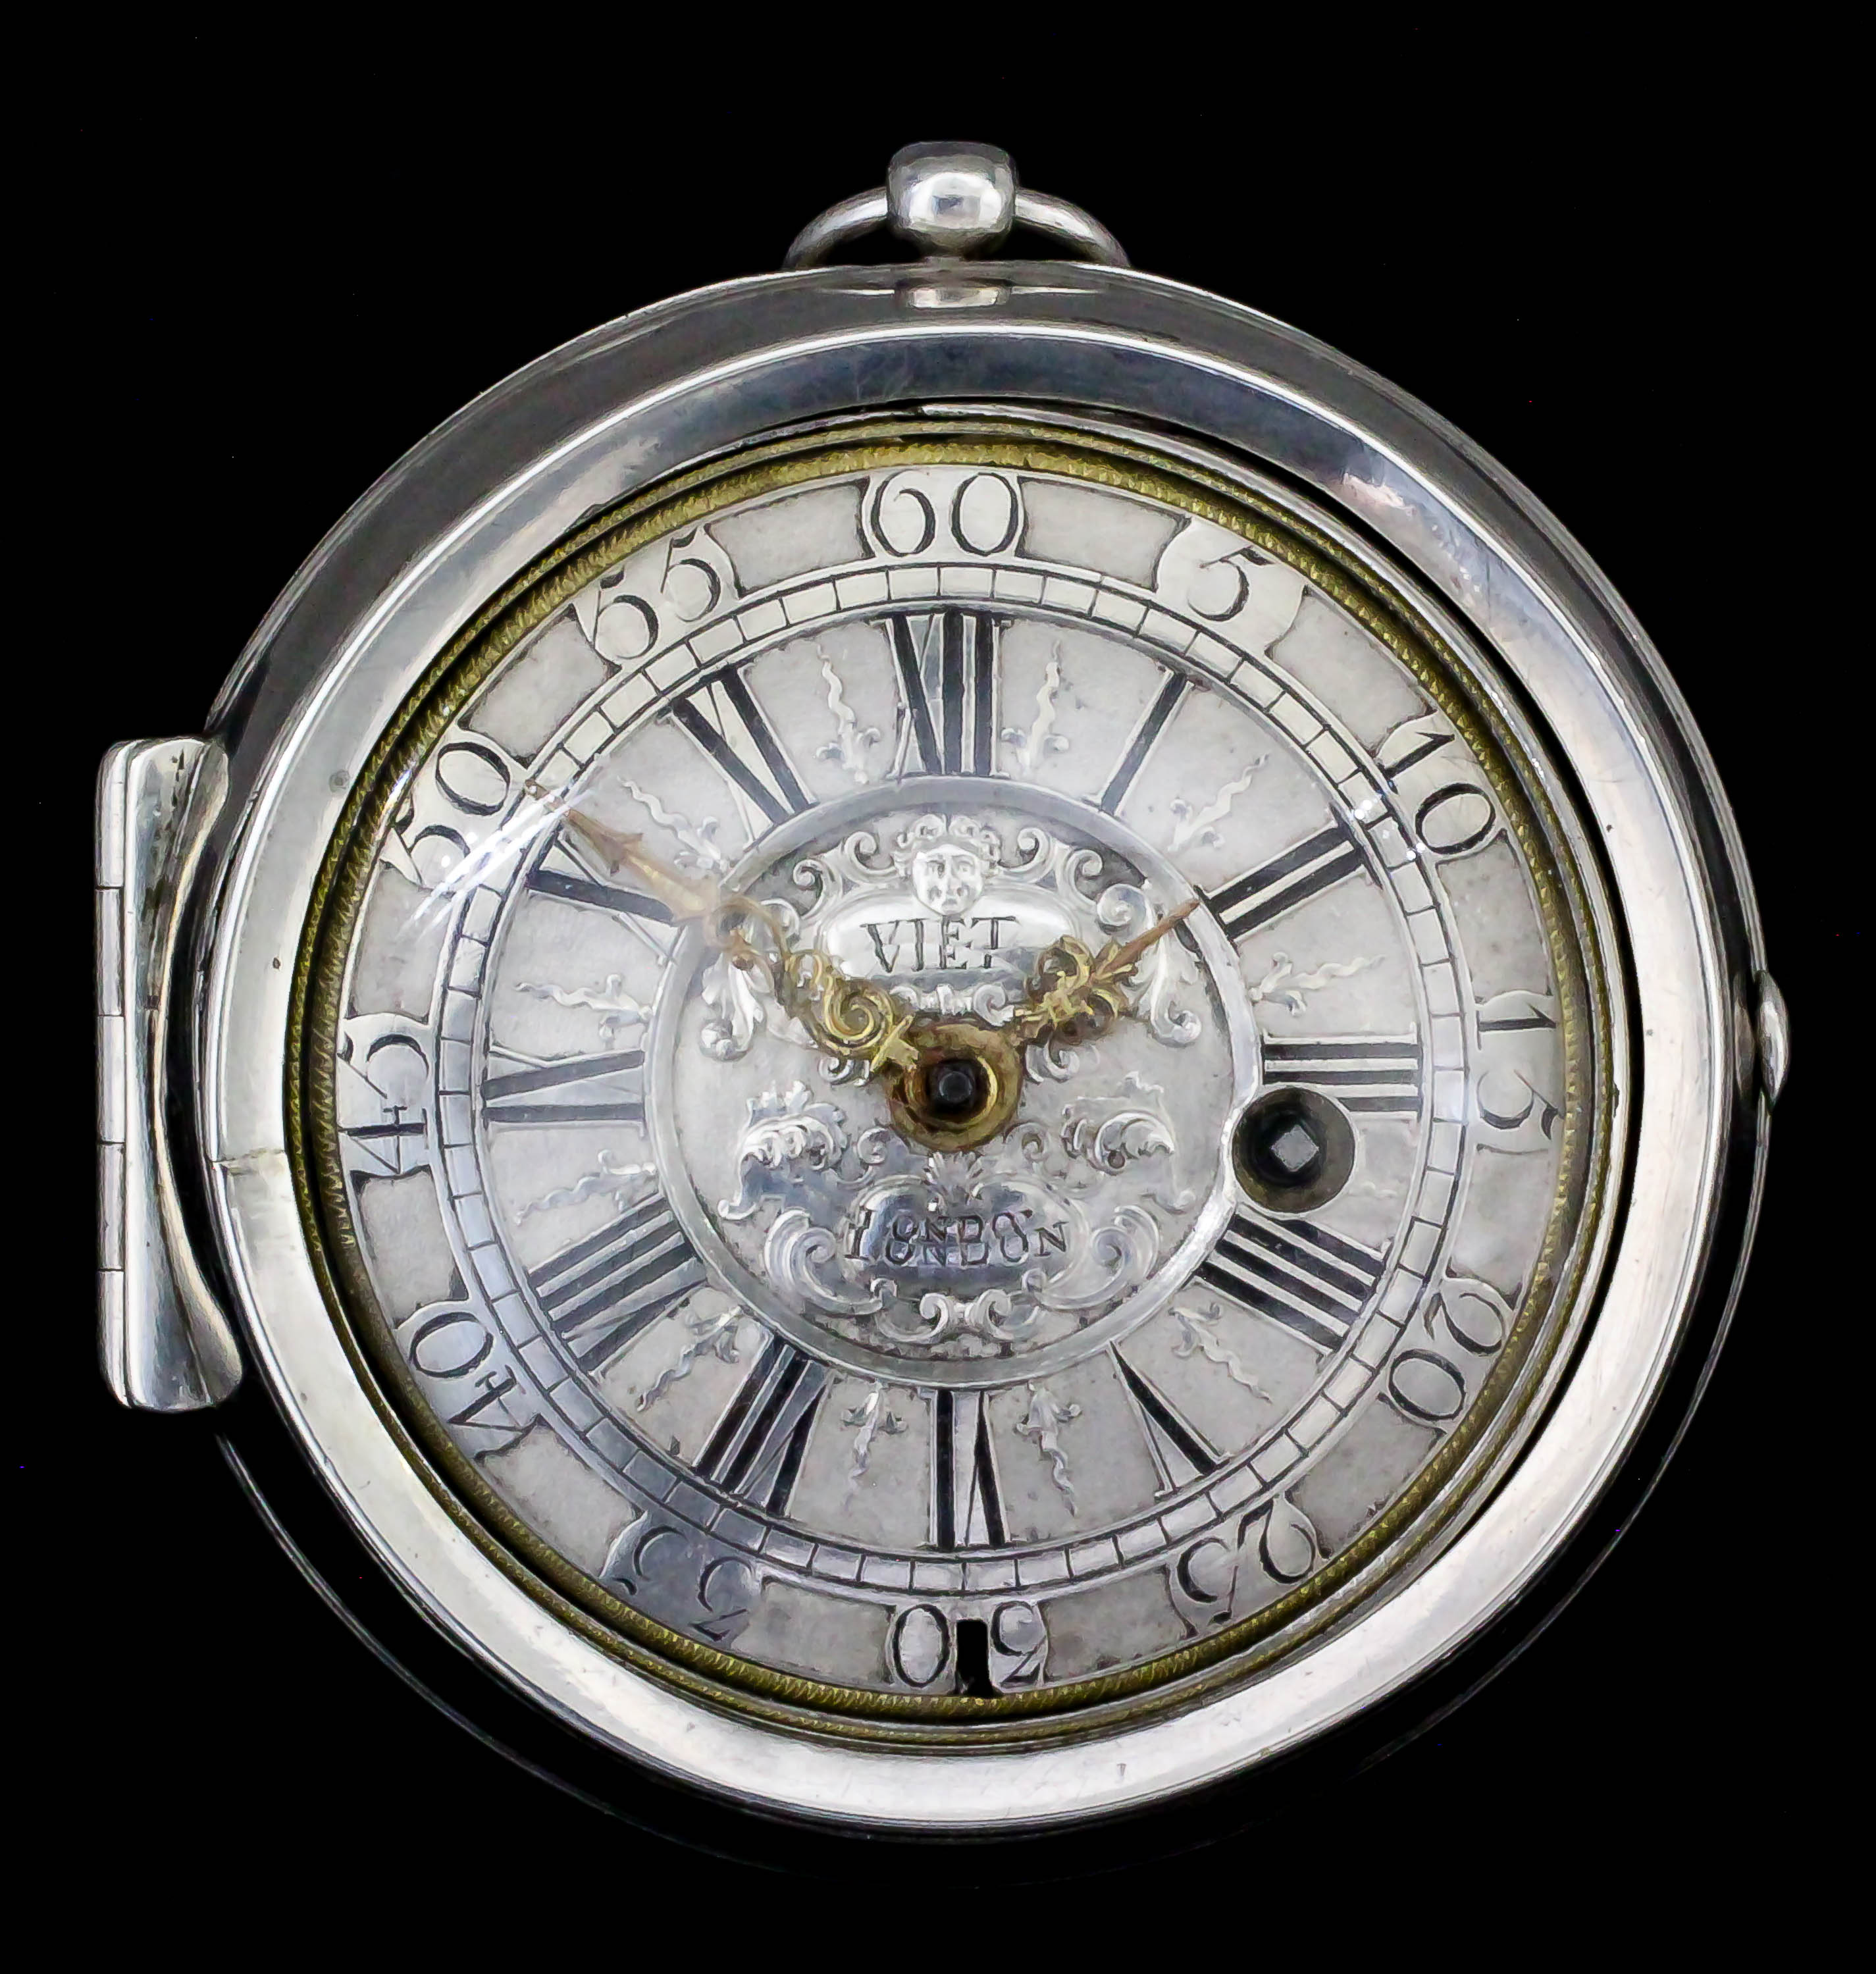 An early 18th Century silver pair cased verge pocket watch by Viet of London, the silver champleve